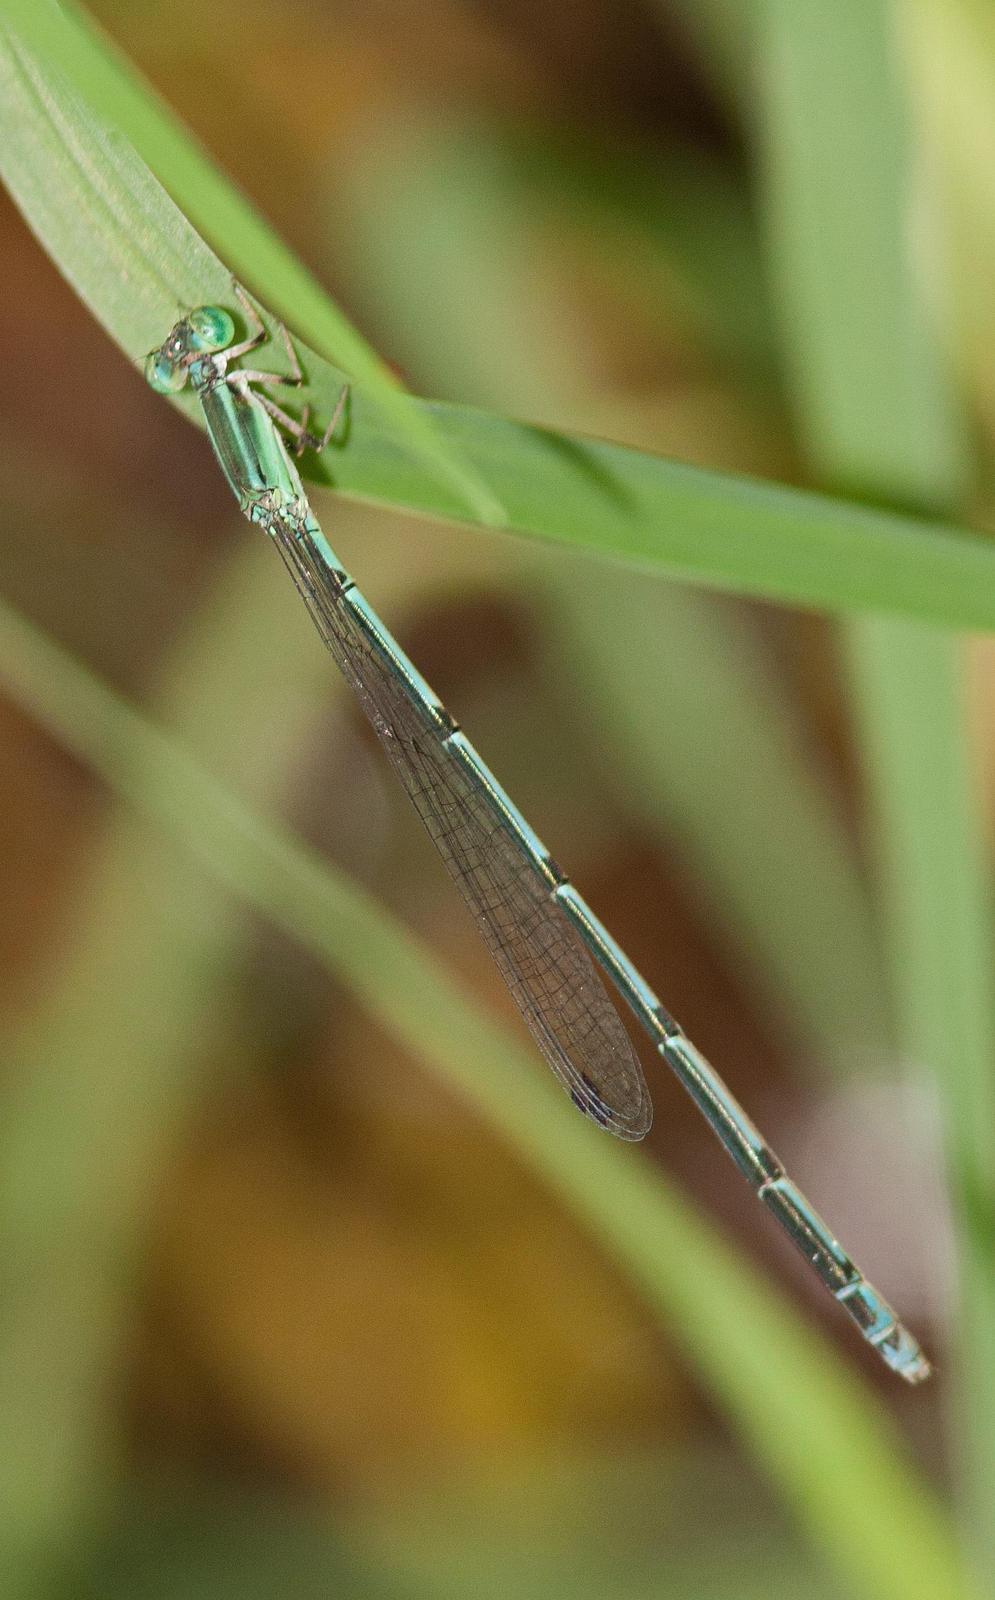 Cream-tipped Swampdamsel Photo by Terry Hibbitts